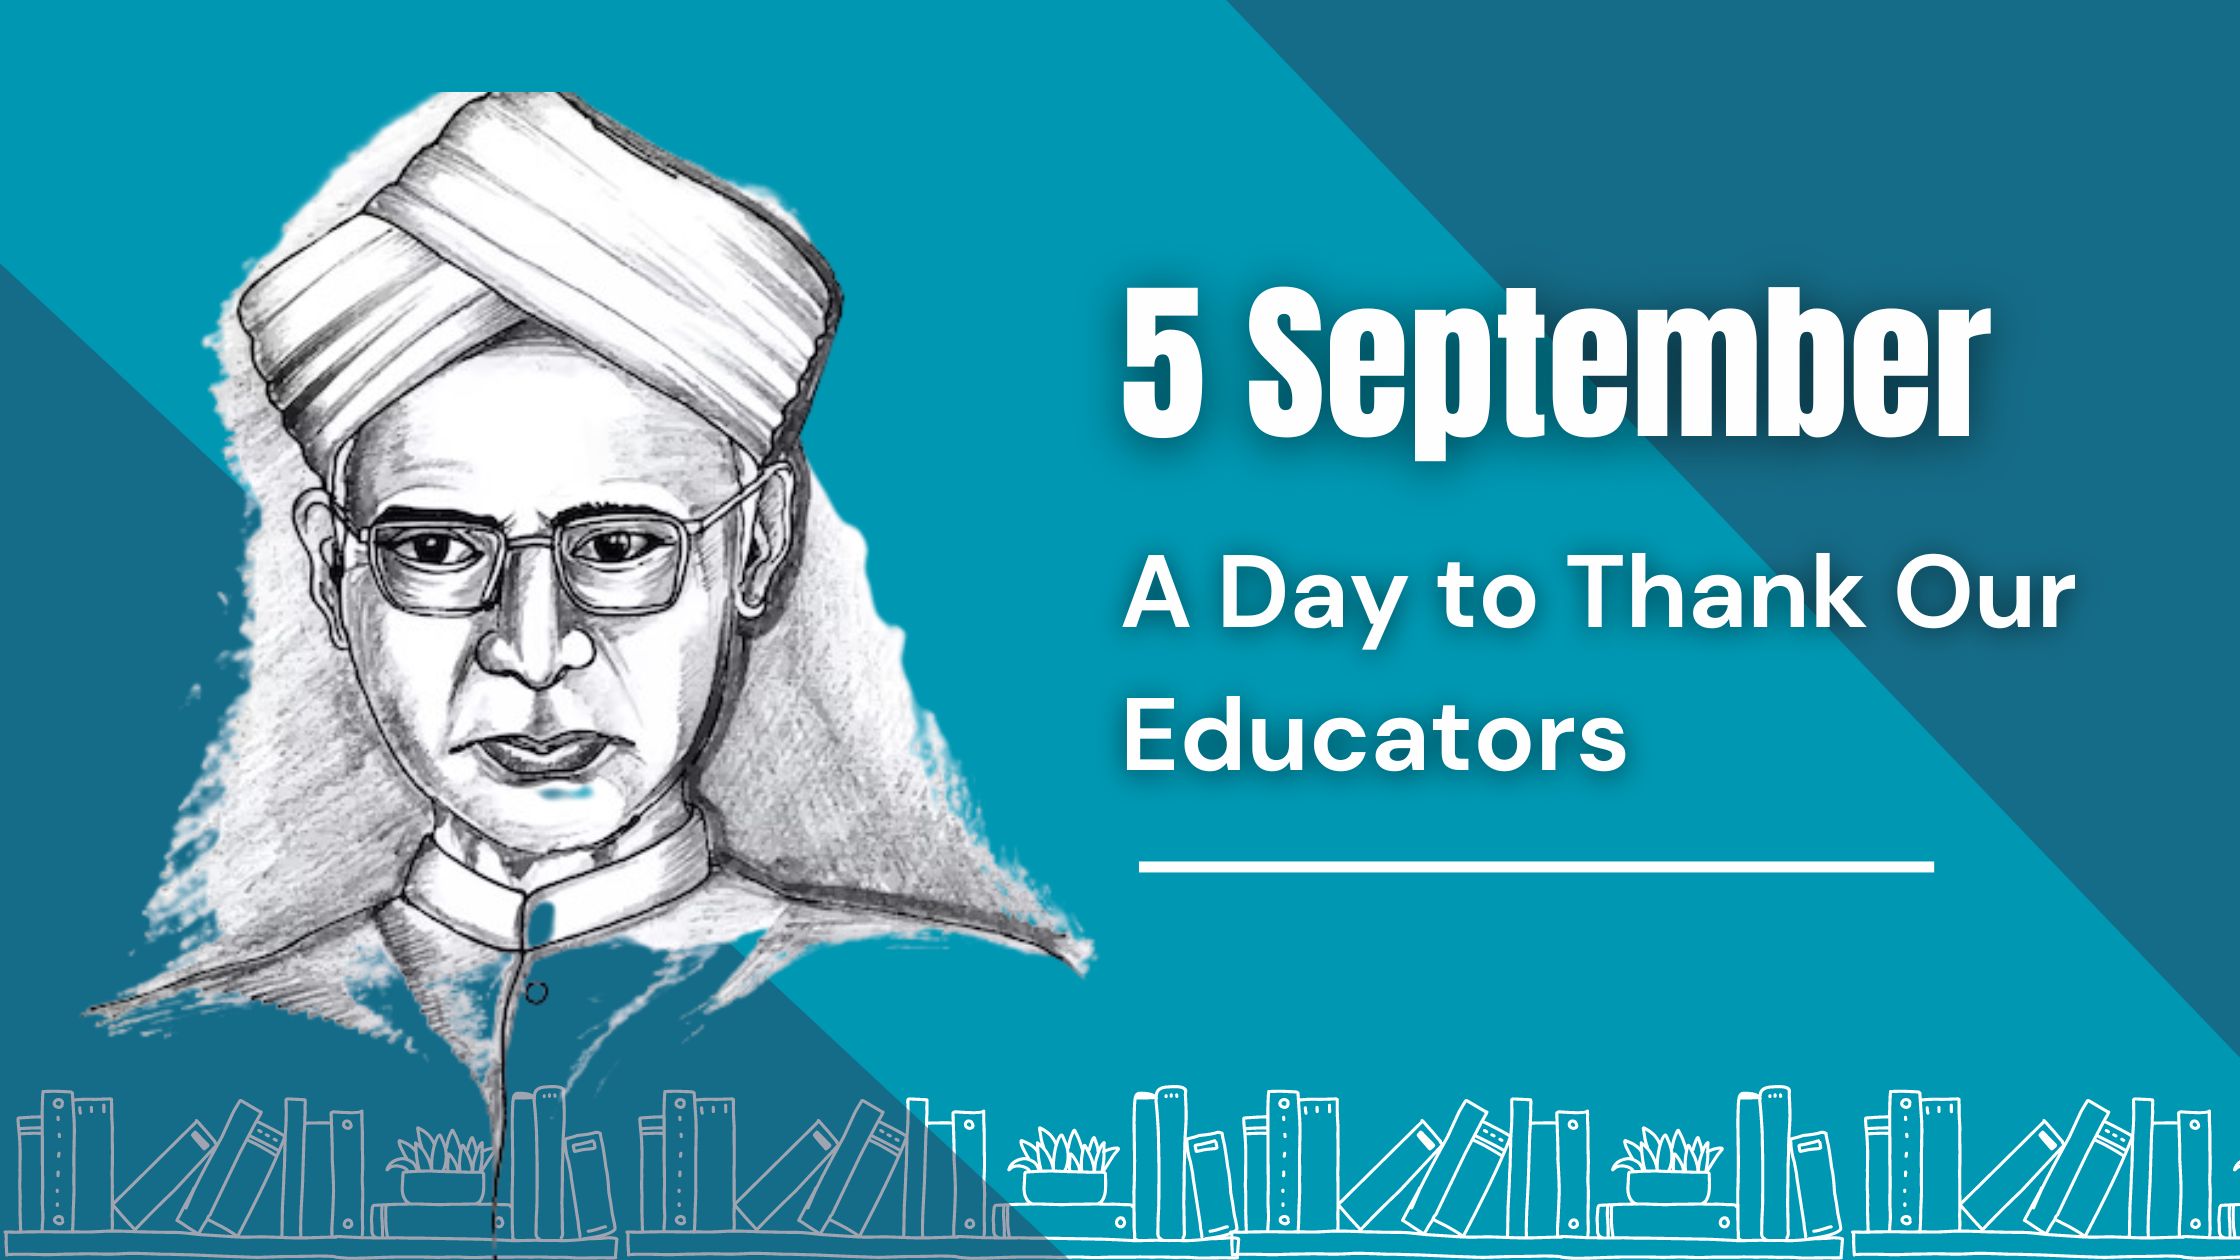 September 5th- A Day to Thank Our Educators